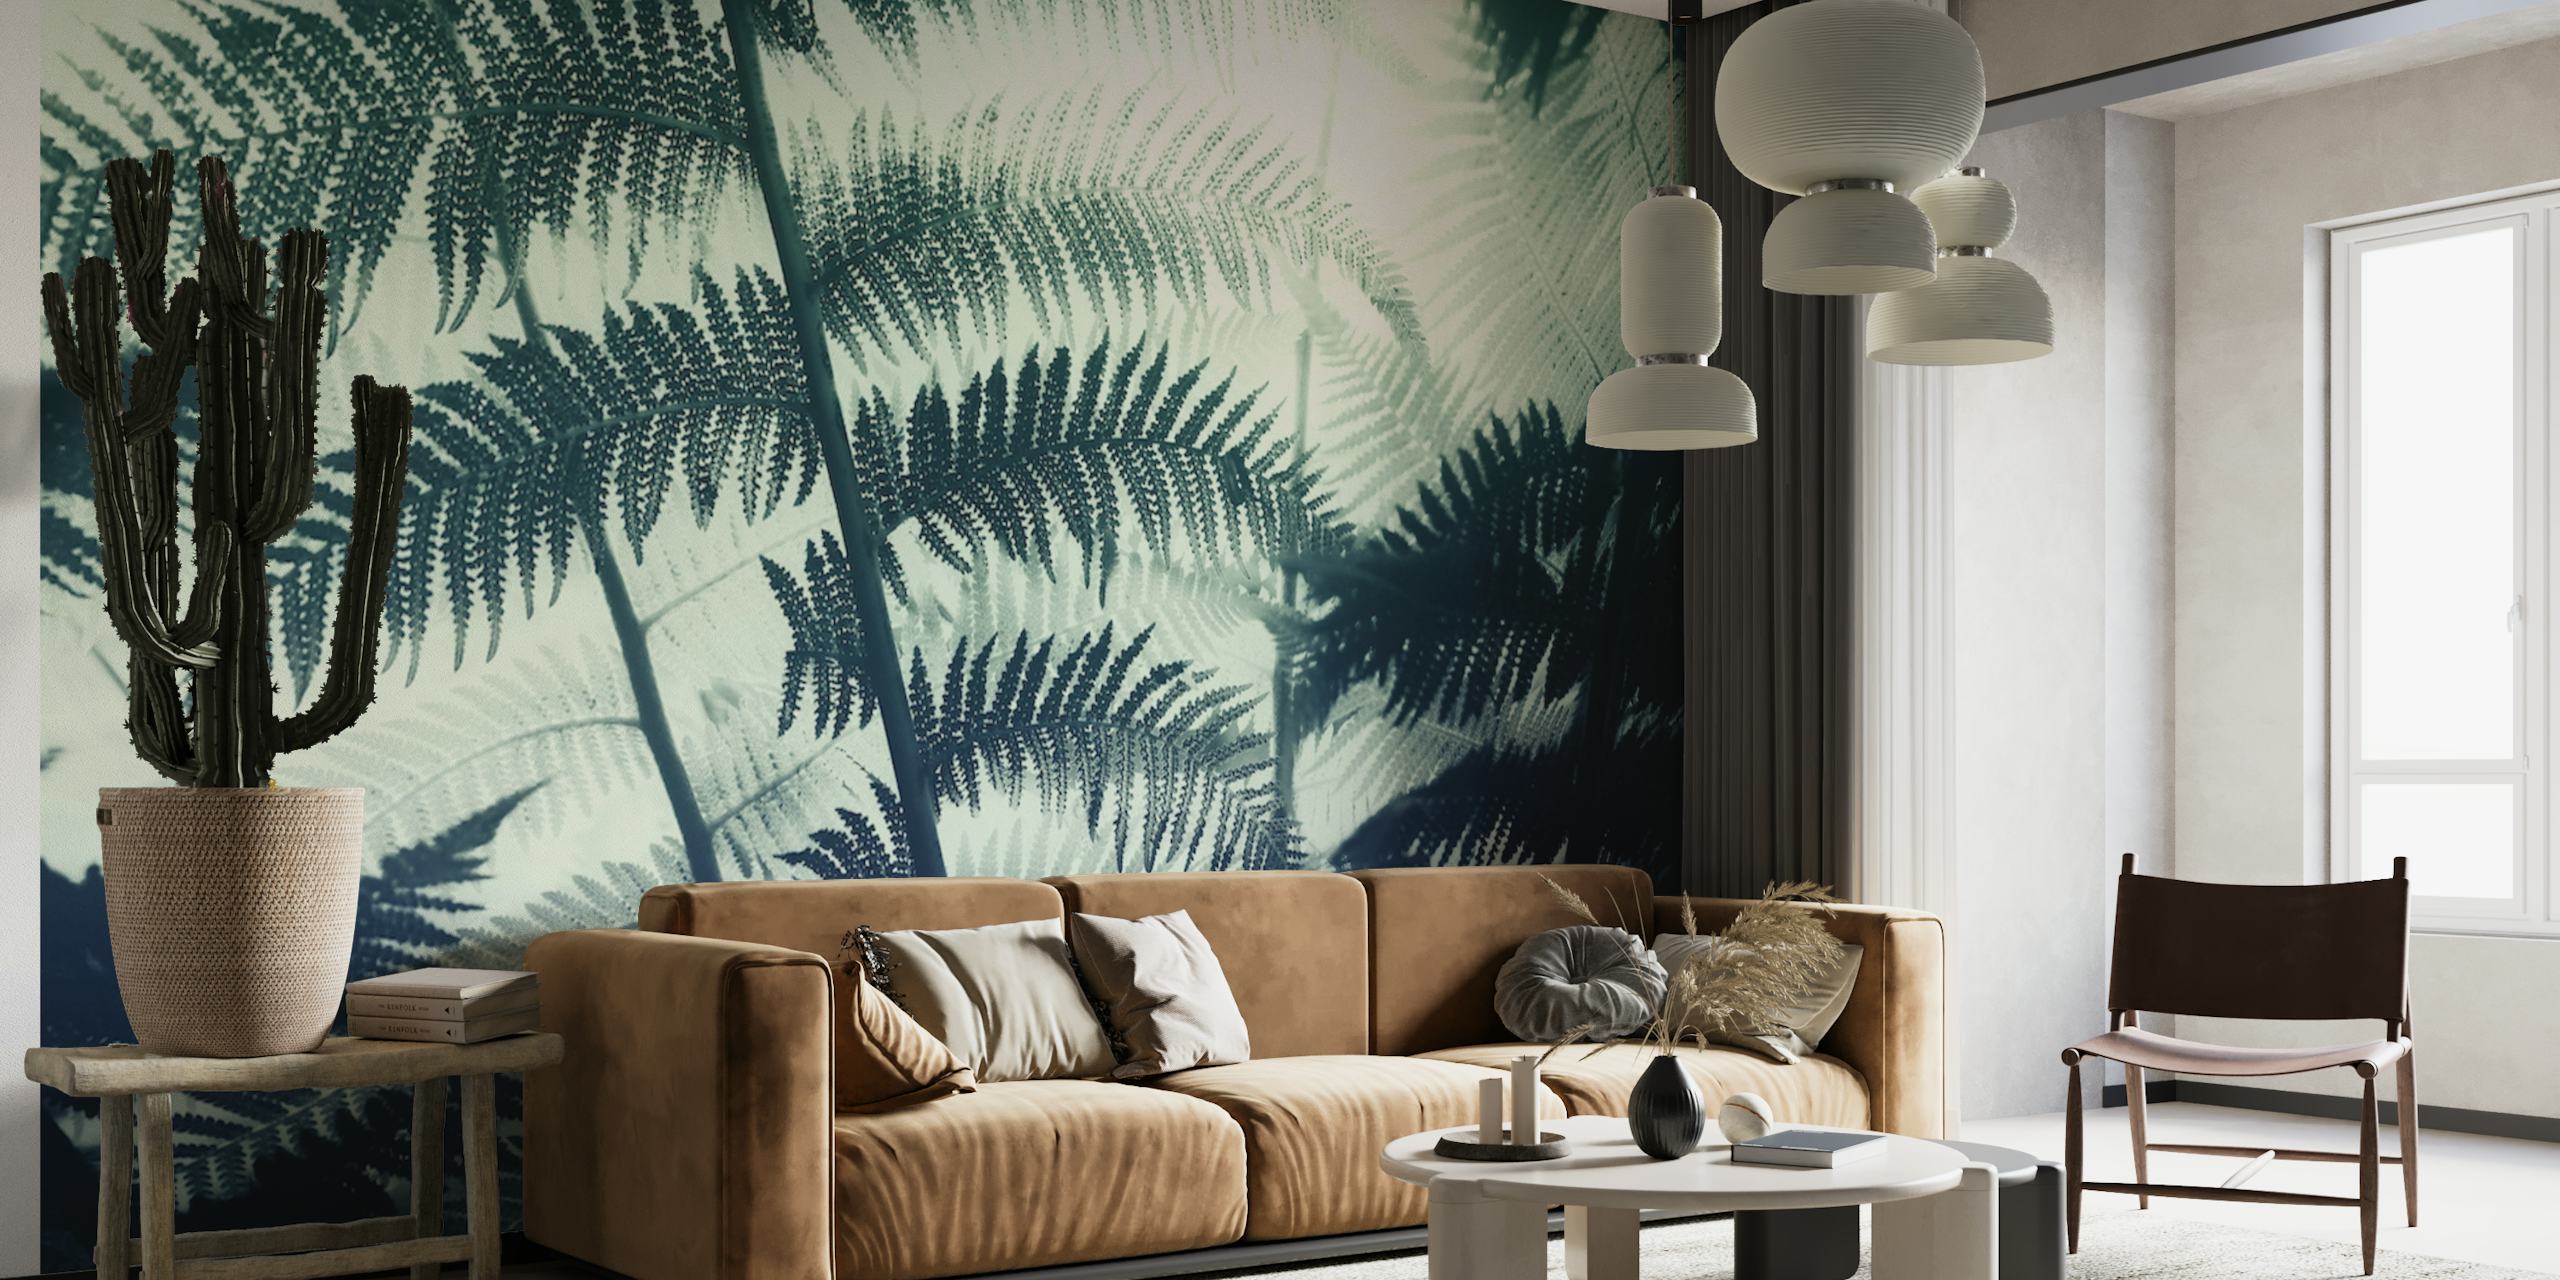 Illuminated Fern Leaves wall mural with shadowy botanical patterns